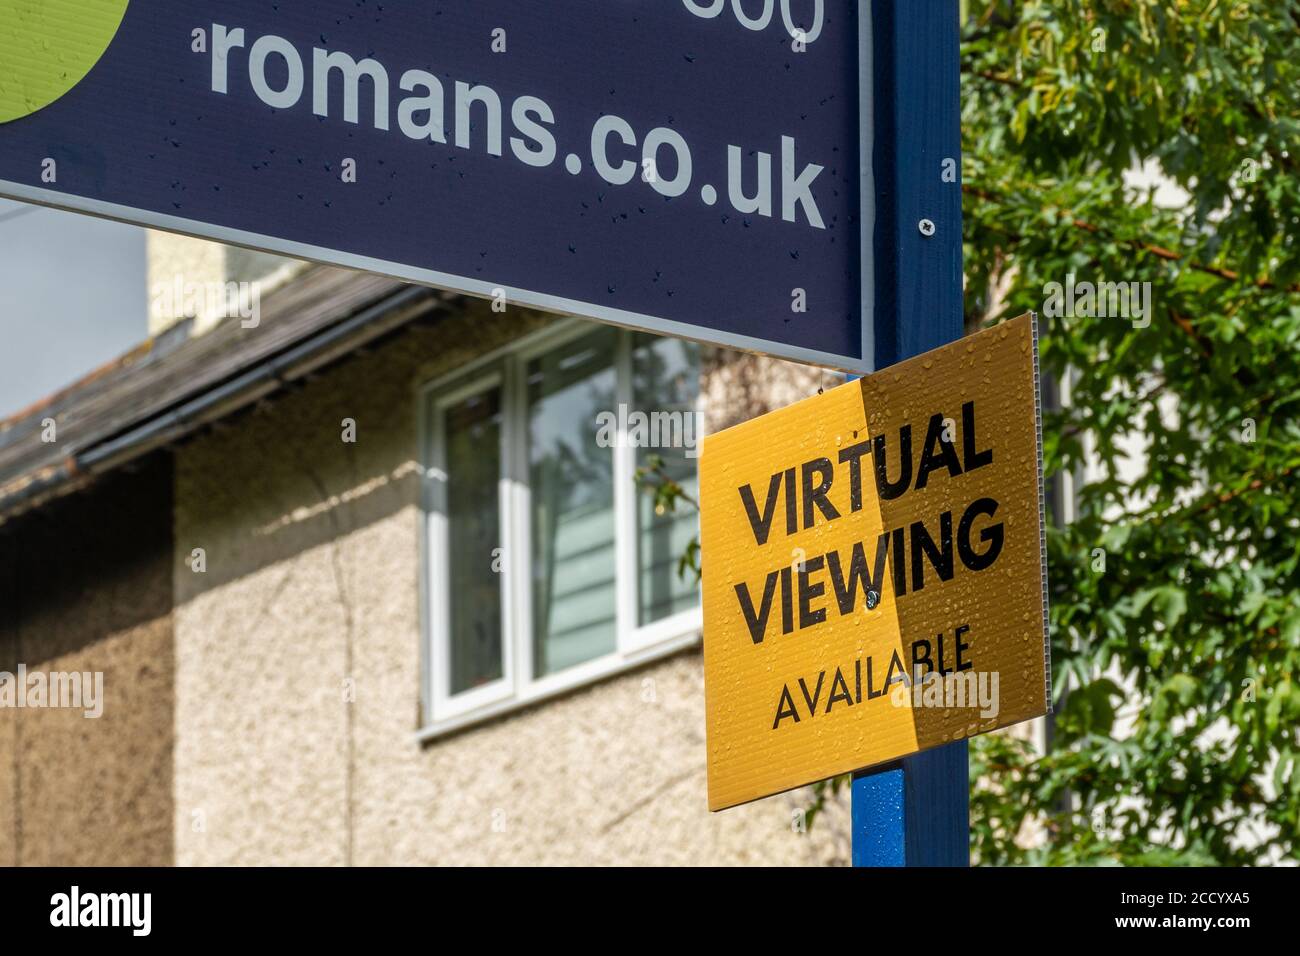 Virtual viewing available on a Romans estate agents house sale borad during the coronavirus covid-19 pandemic, August 2020, UK Stock Photo